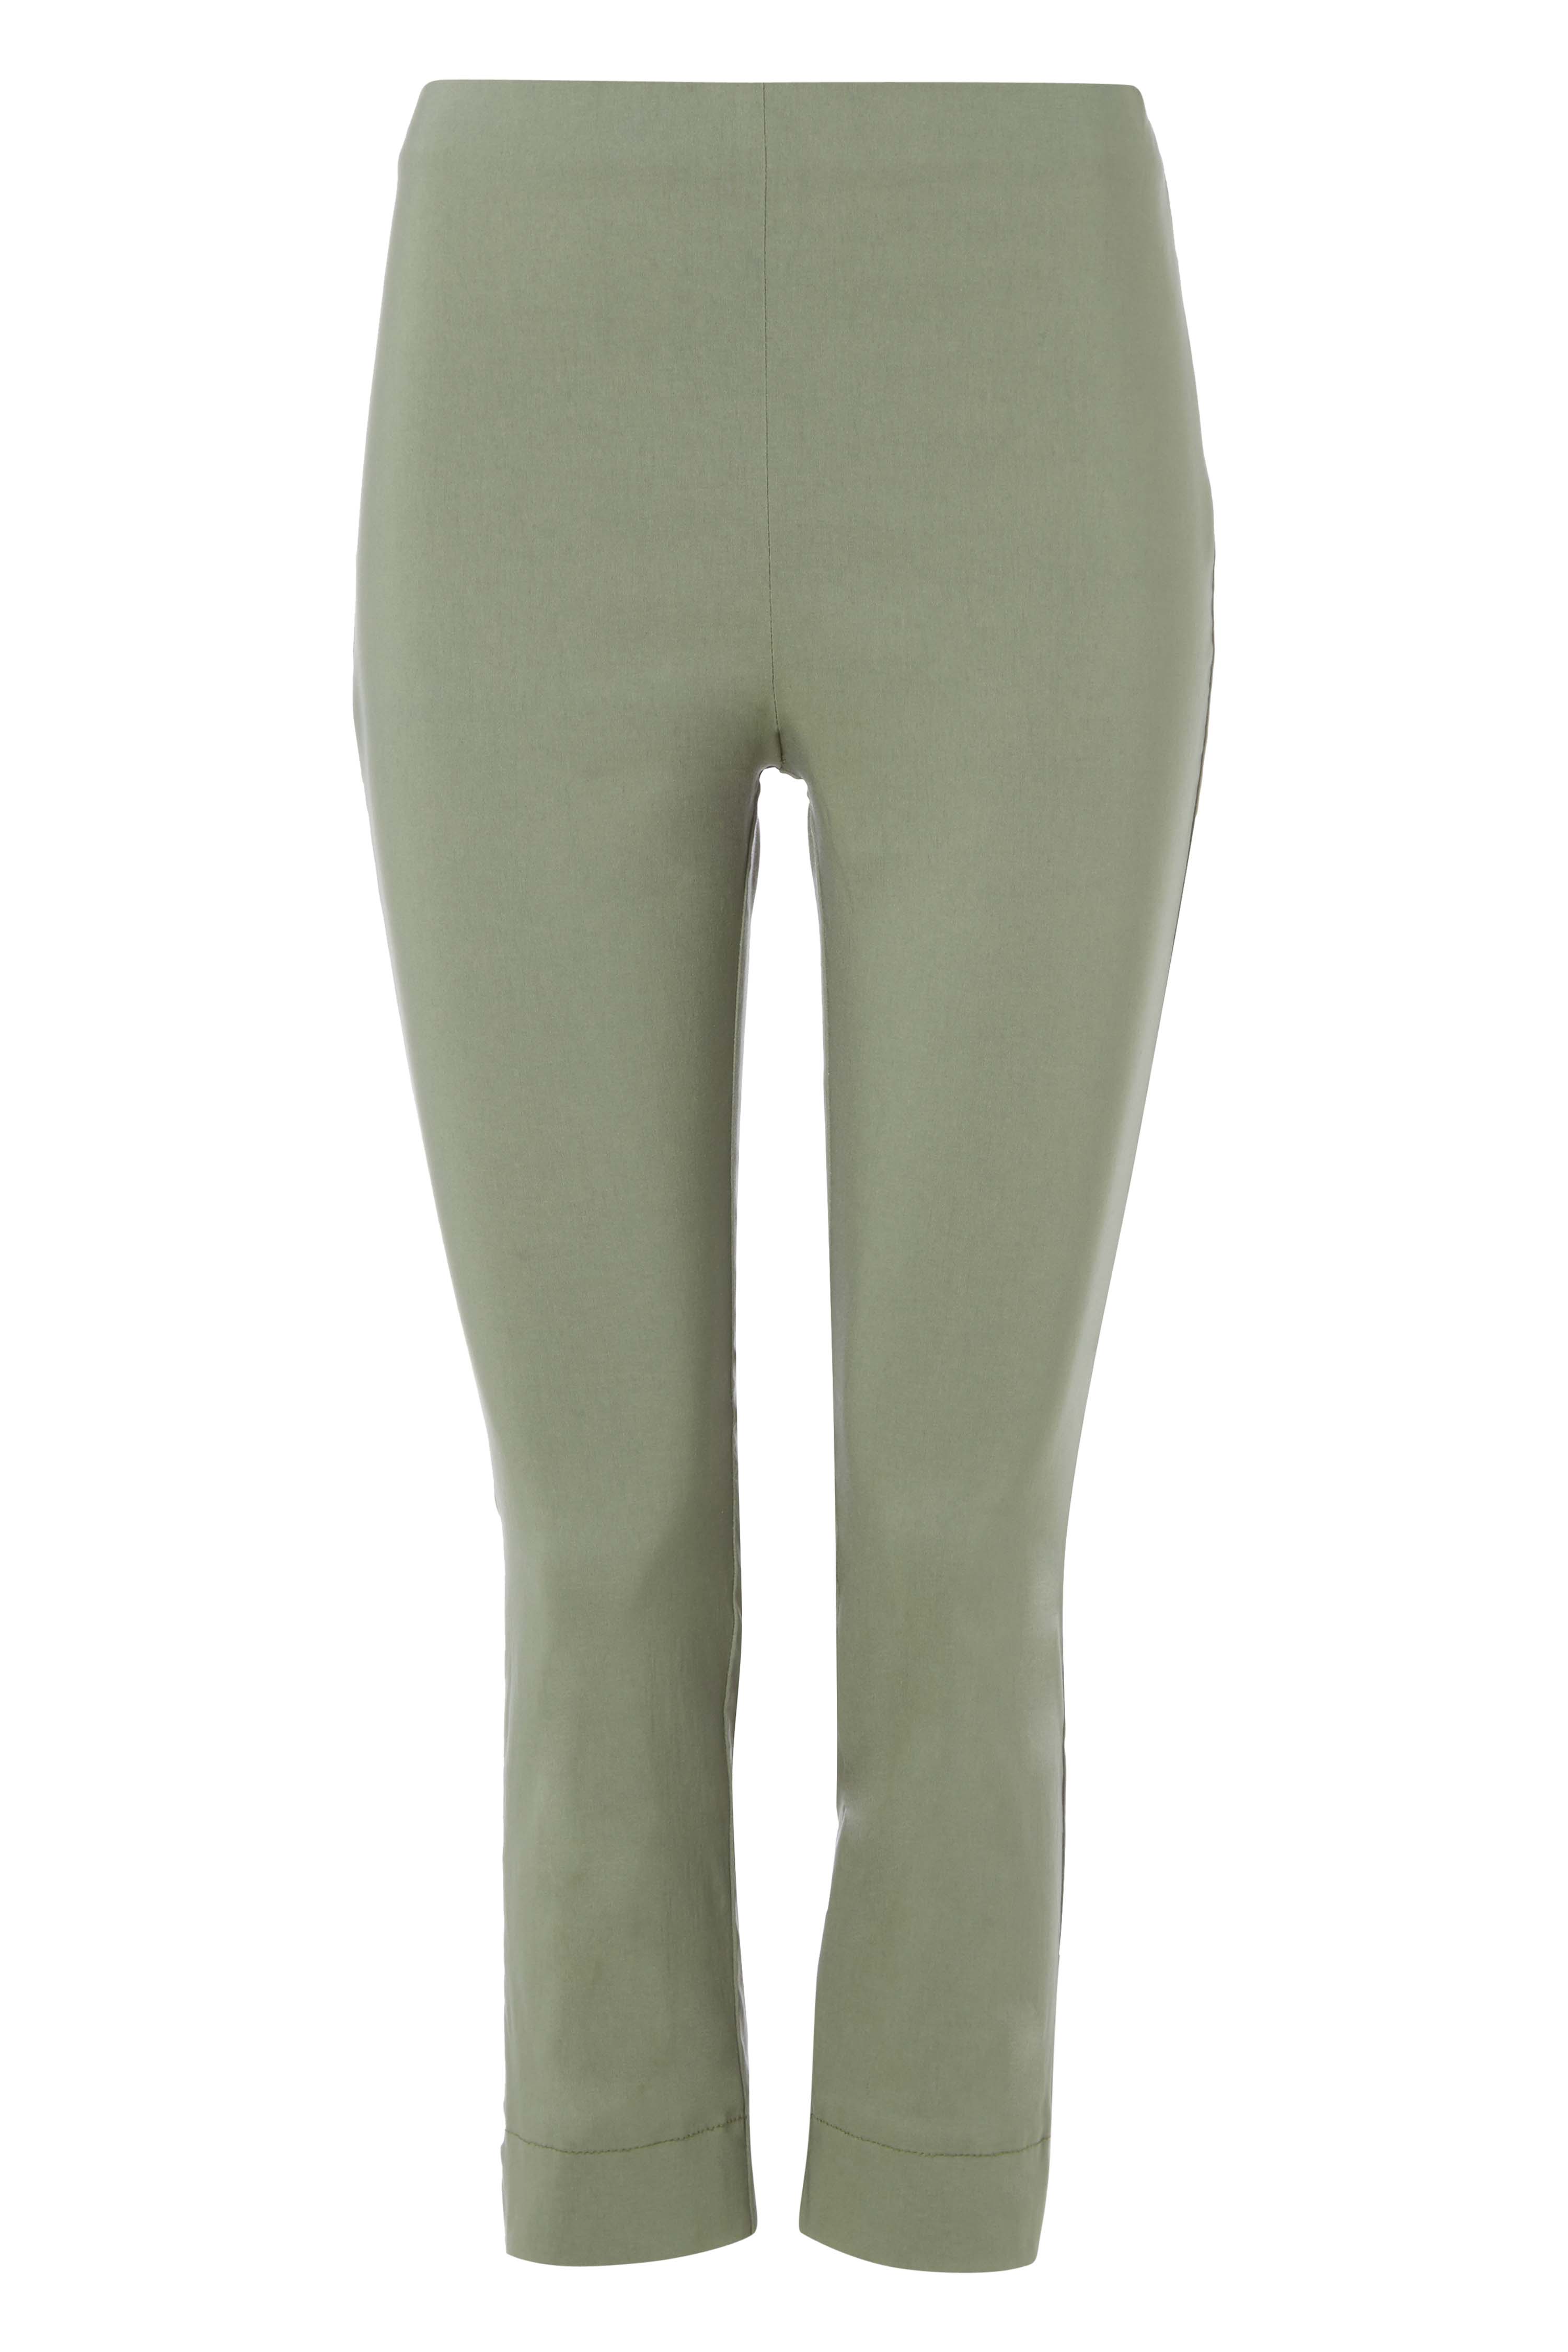 KHAKI Cropped Stretch Trouser, Image 3 of 3